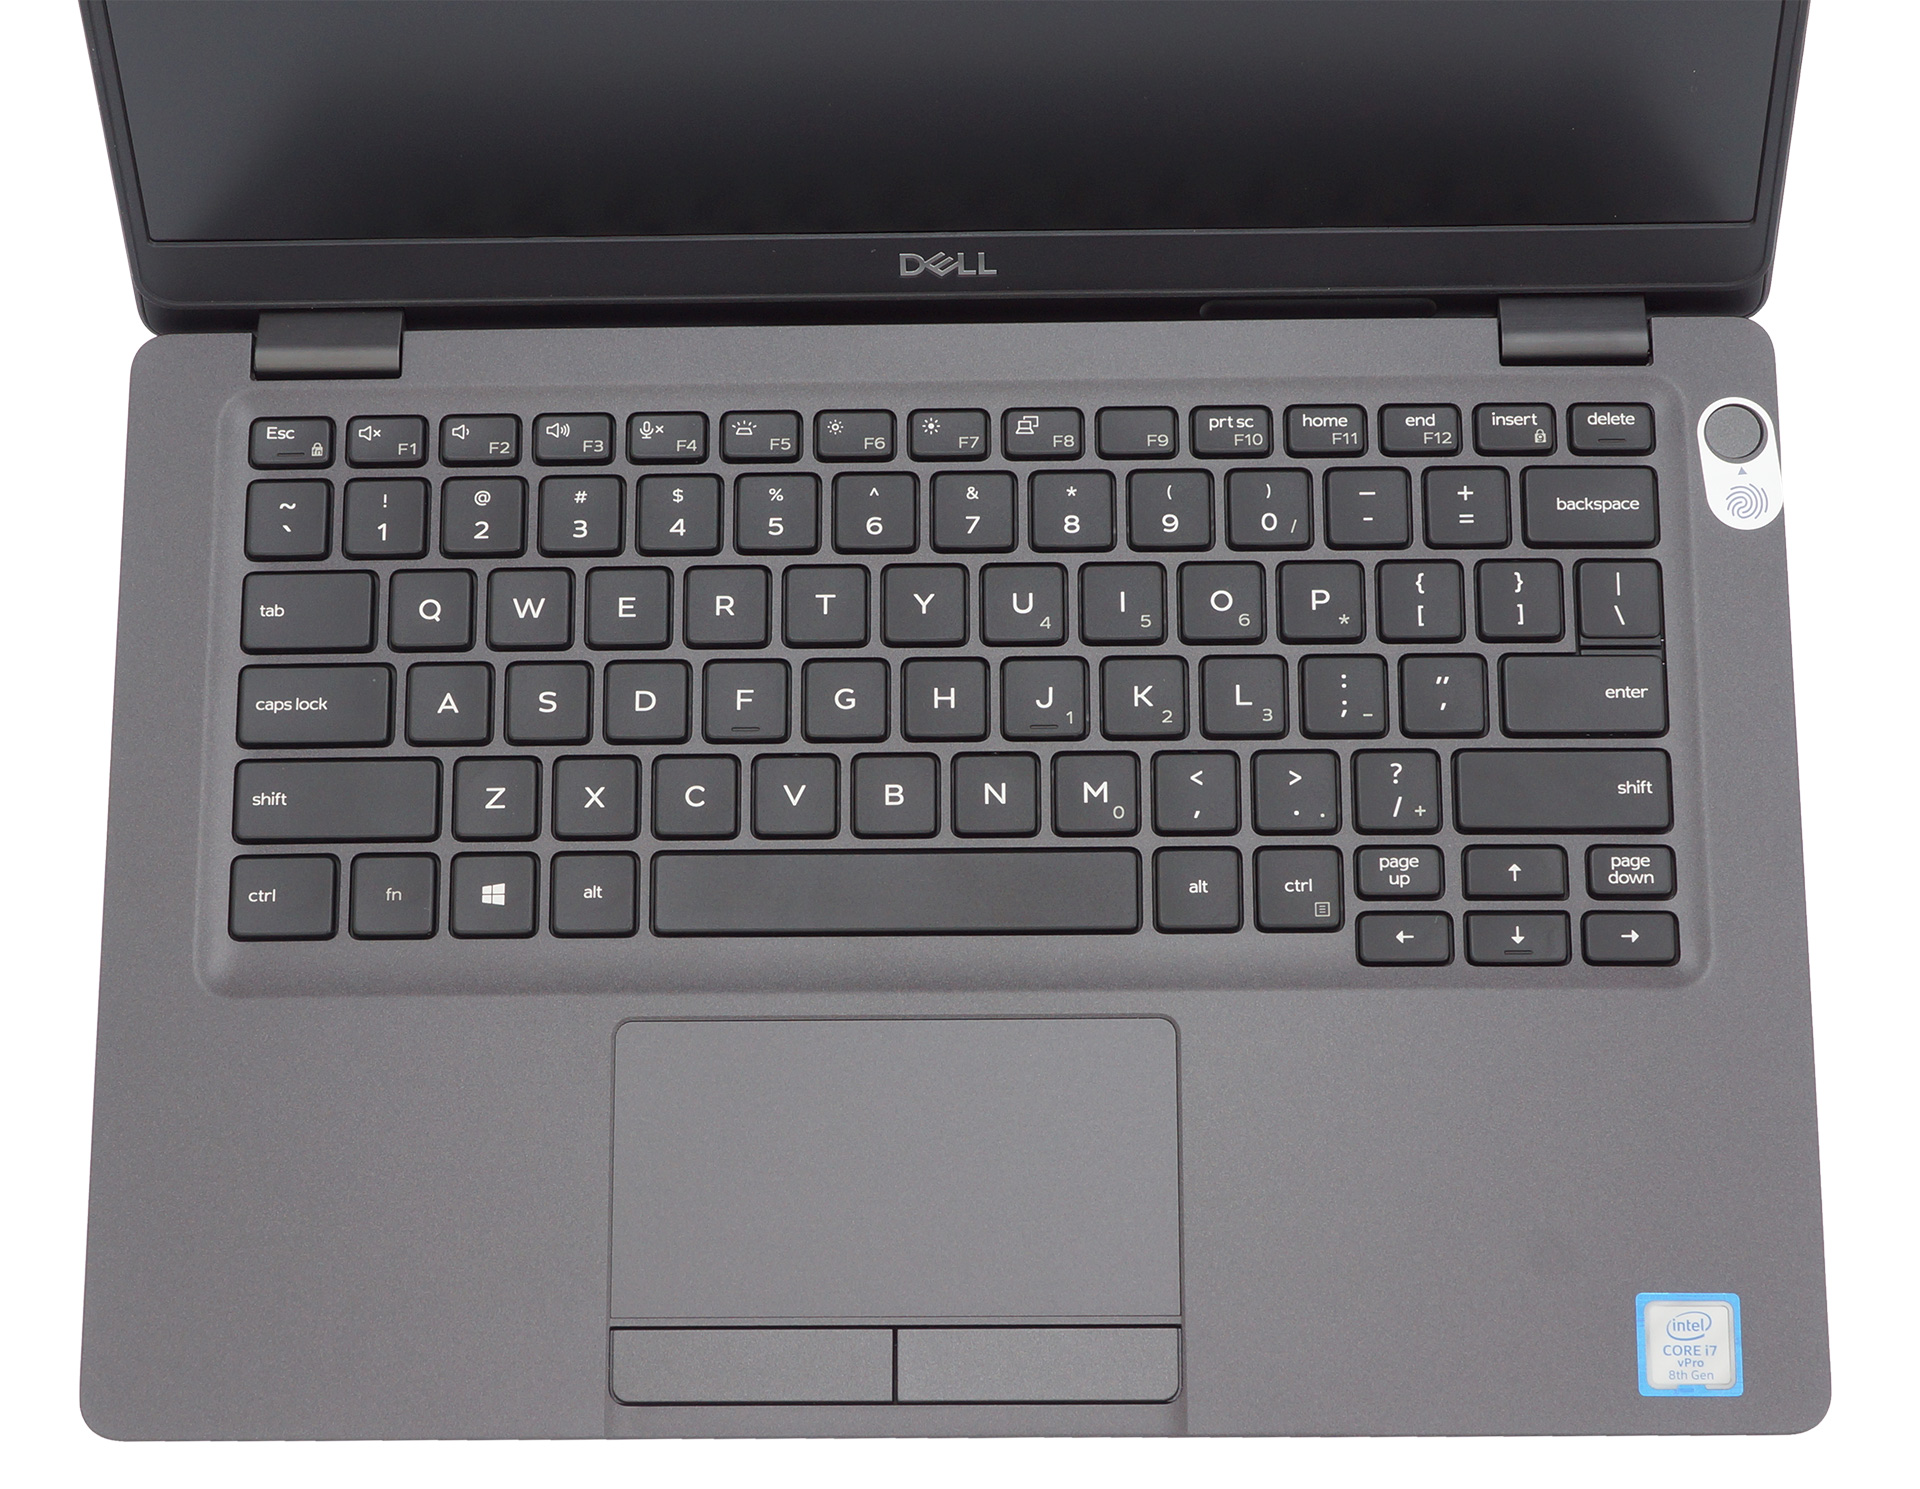 Dell Latitude 5300 review - this midget will bring your security